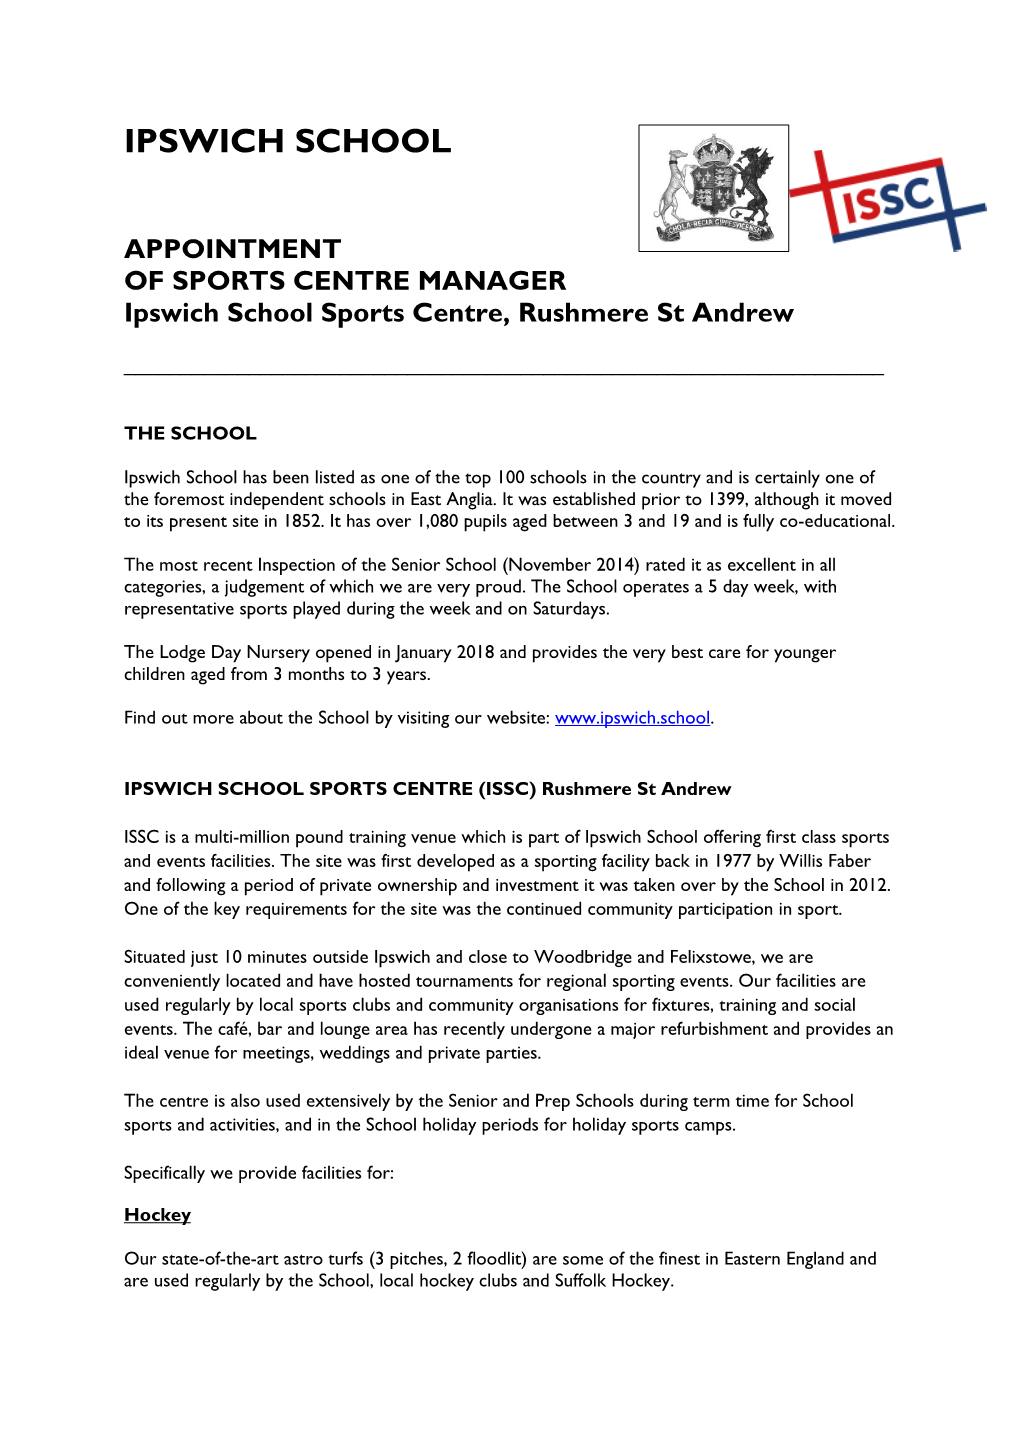 APPOINTMENT of SPORTS CENTRE MANAGER Ipswich School Sports Centre, Rushmere St Andrew